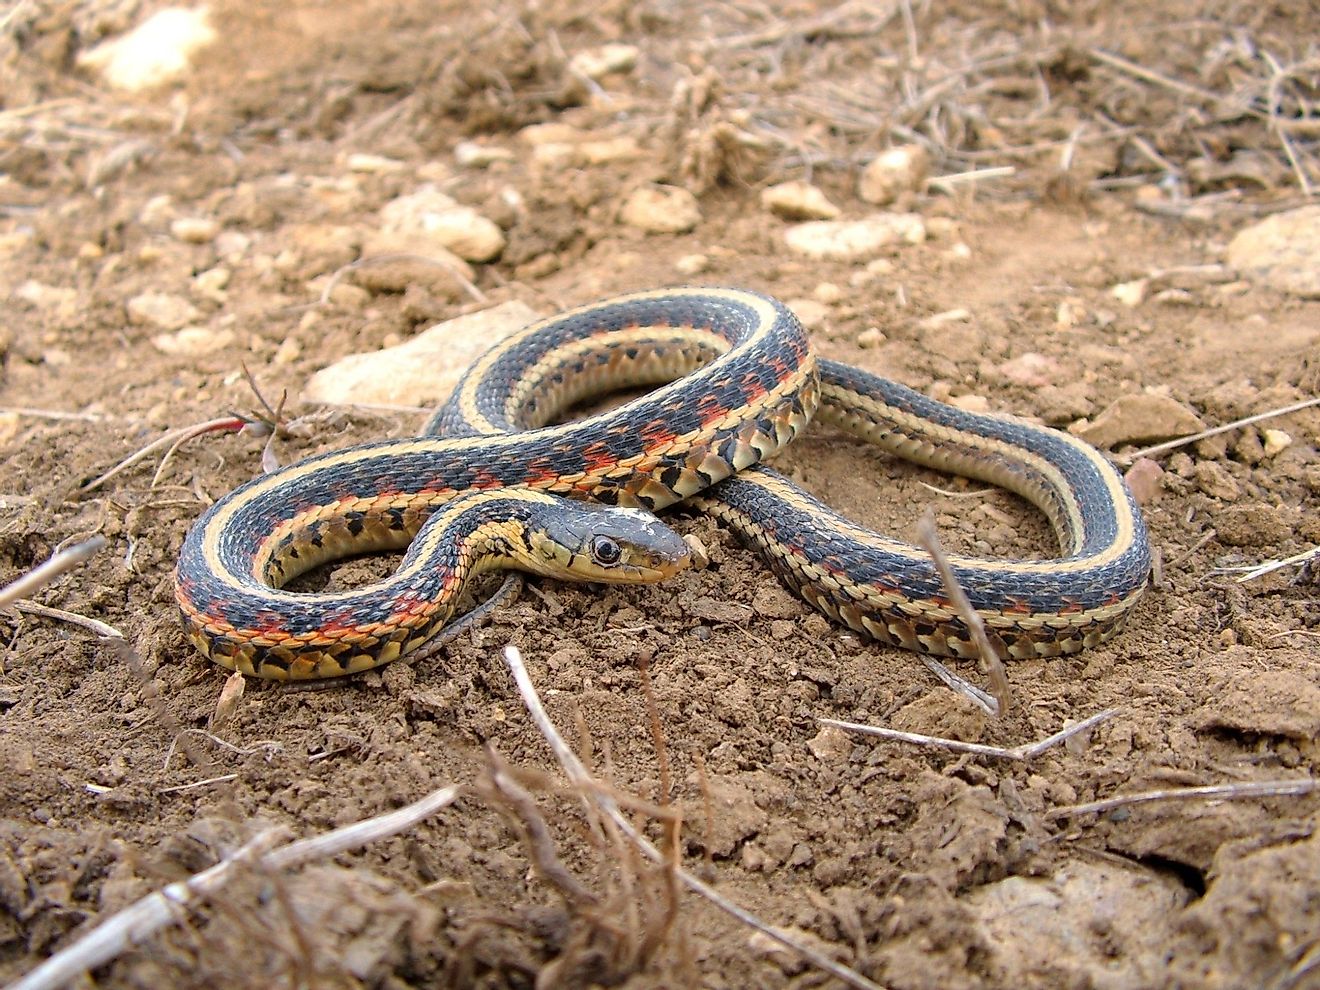 A red-sided garter snake is one of the few species of snakes found in the taiga. Image credit: Matt Jeppson/Shutterstock.com